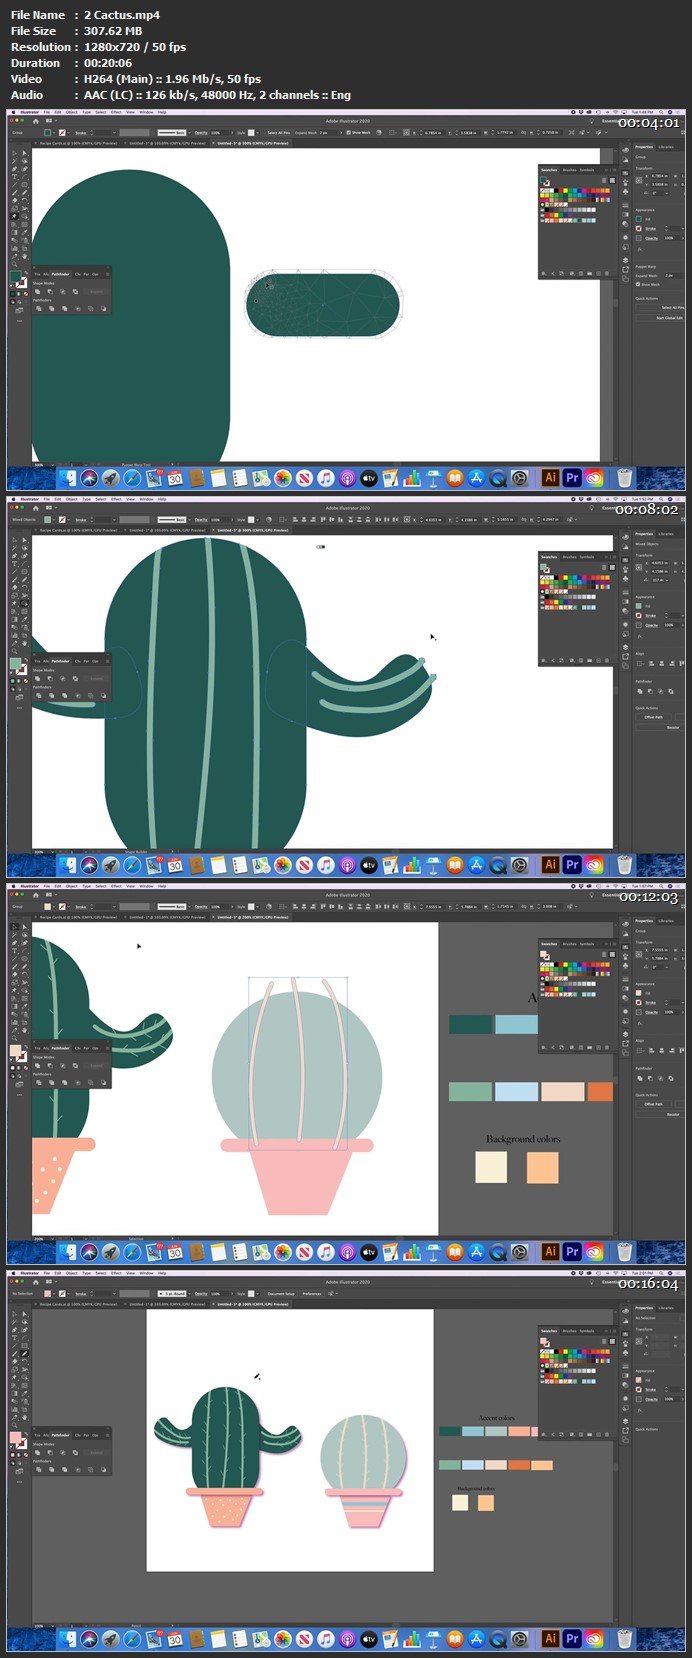 Adobe Illustrator: Paper Cut-out Effect